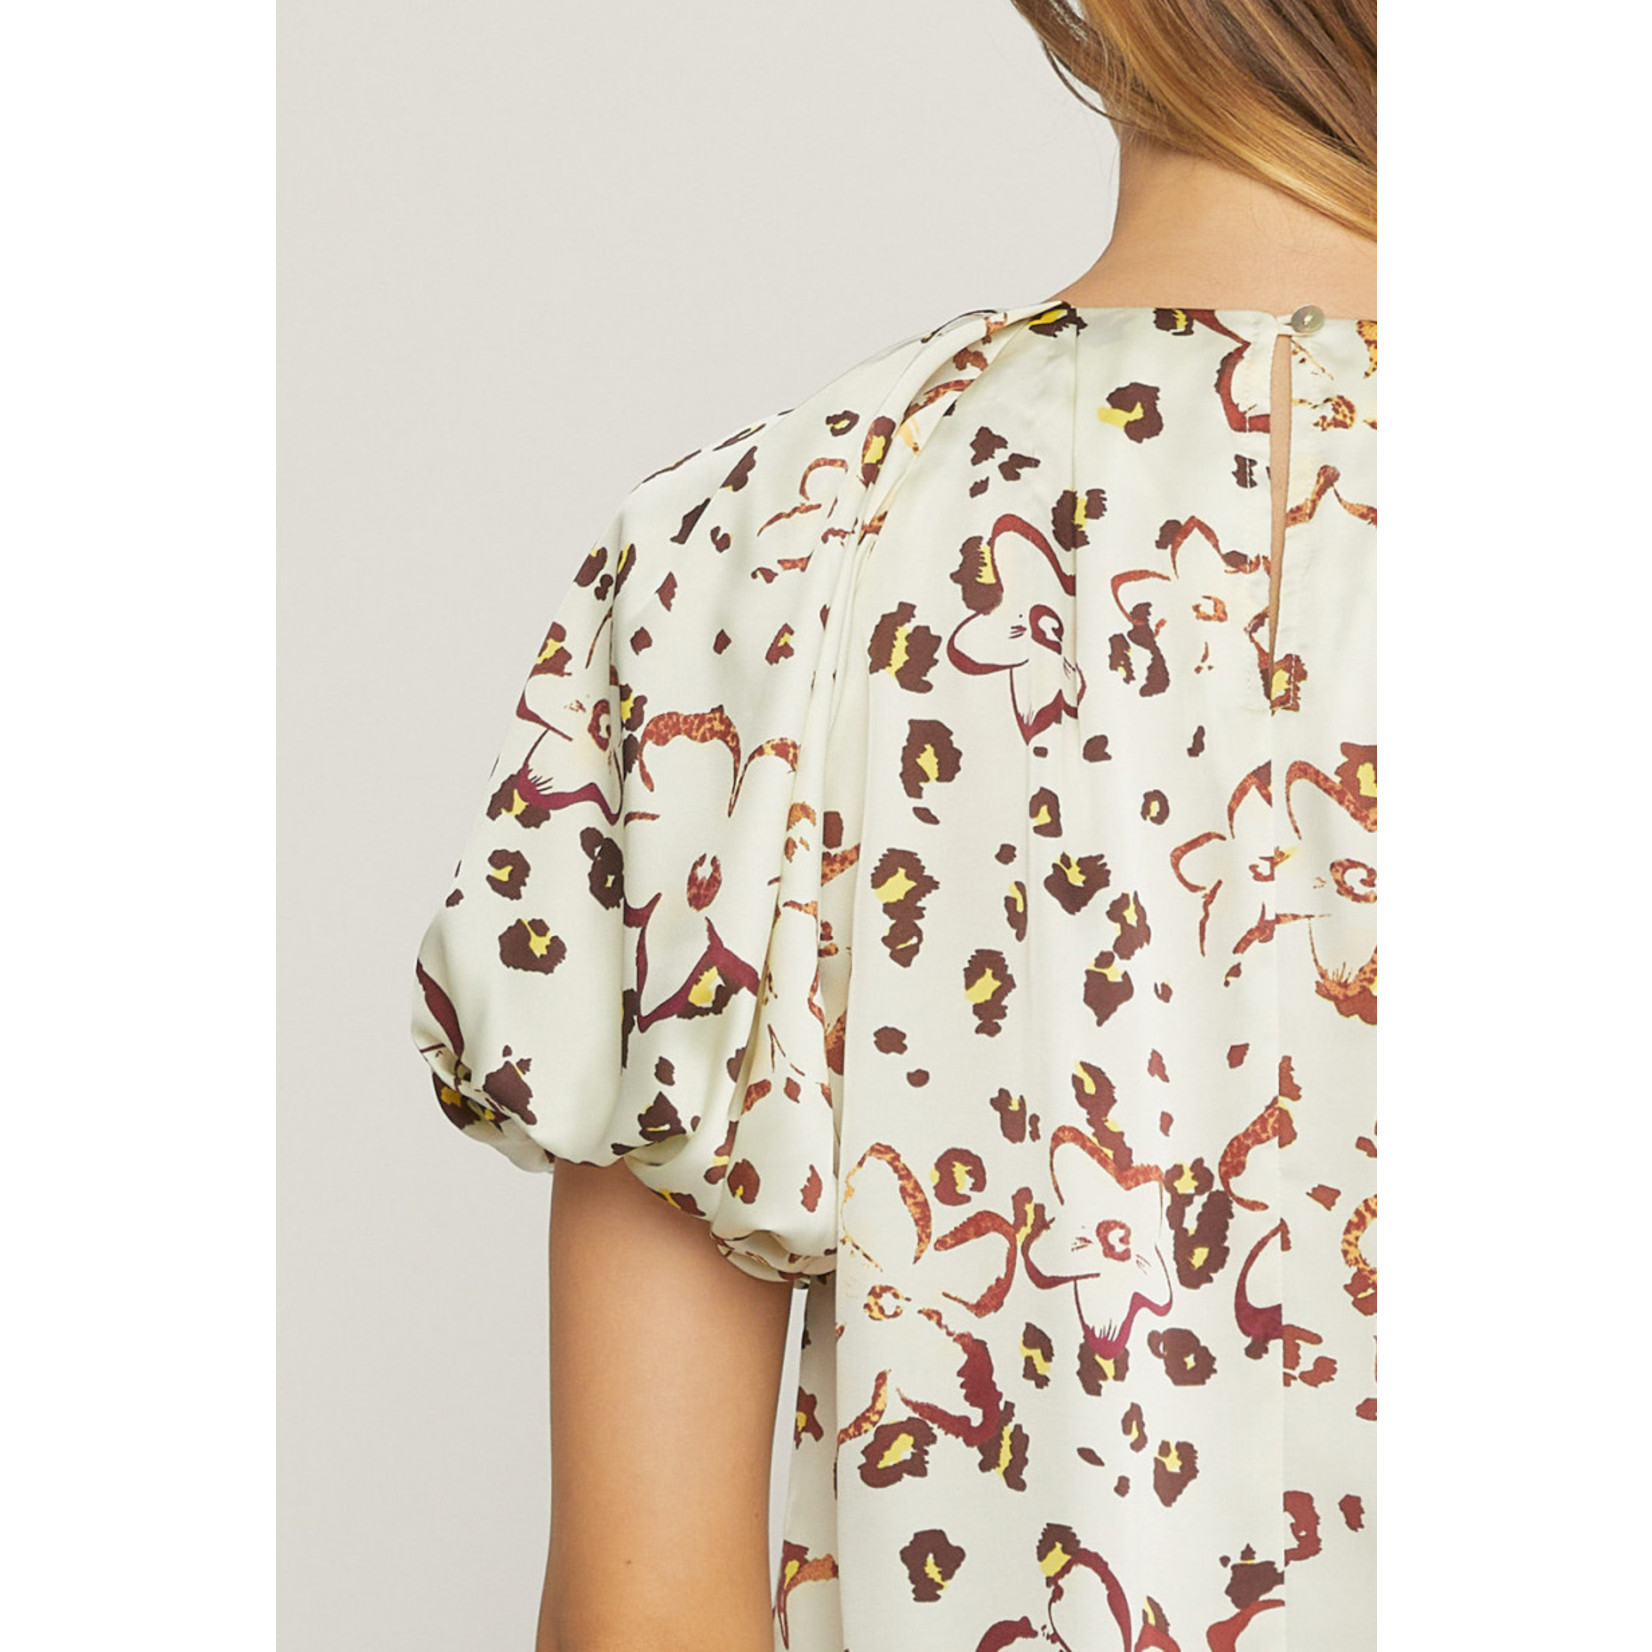 The Sandy Floral Bubble Sleeve Top